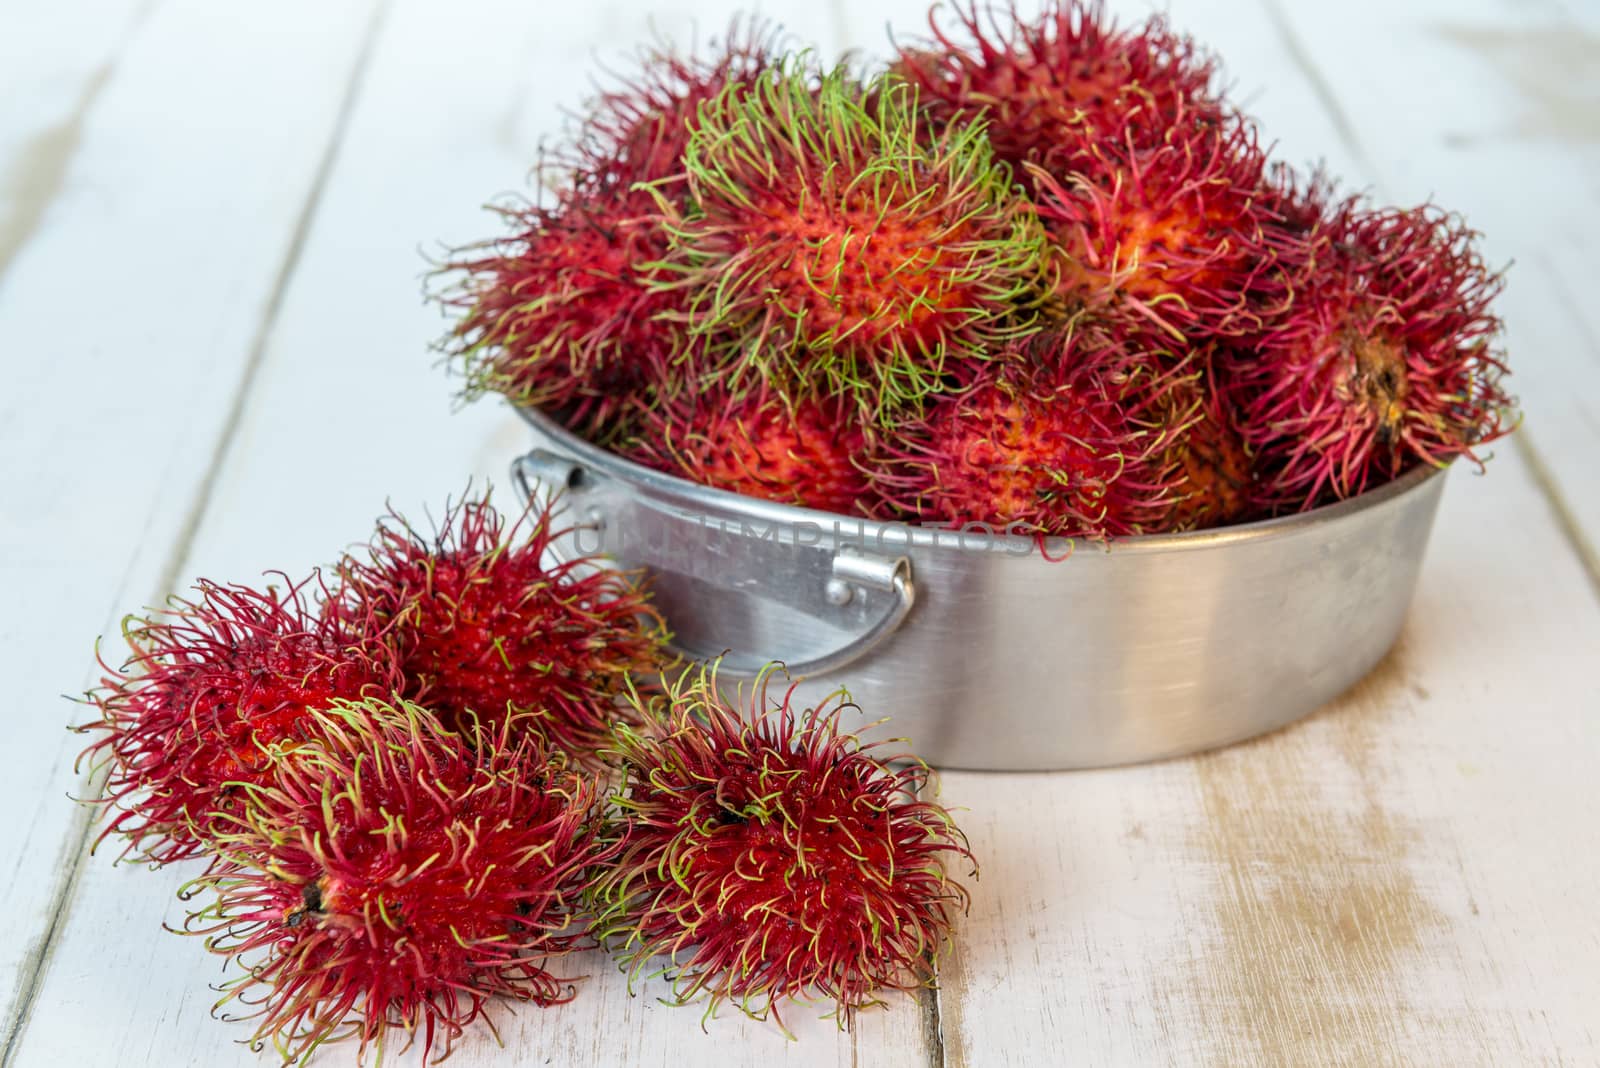 Red rambutan Nephelium lappaceum on white board. Fruit tropical tree of the family Sapindaceae , native to South - East Asia , cultivated in many countries in the region